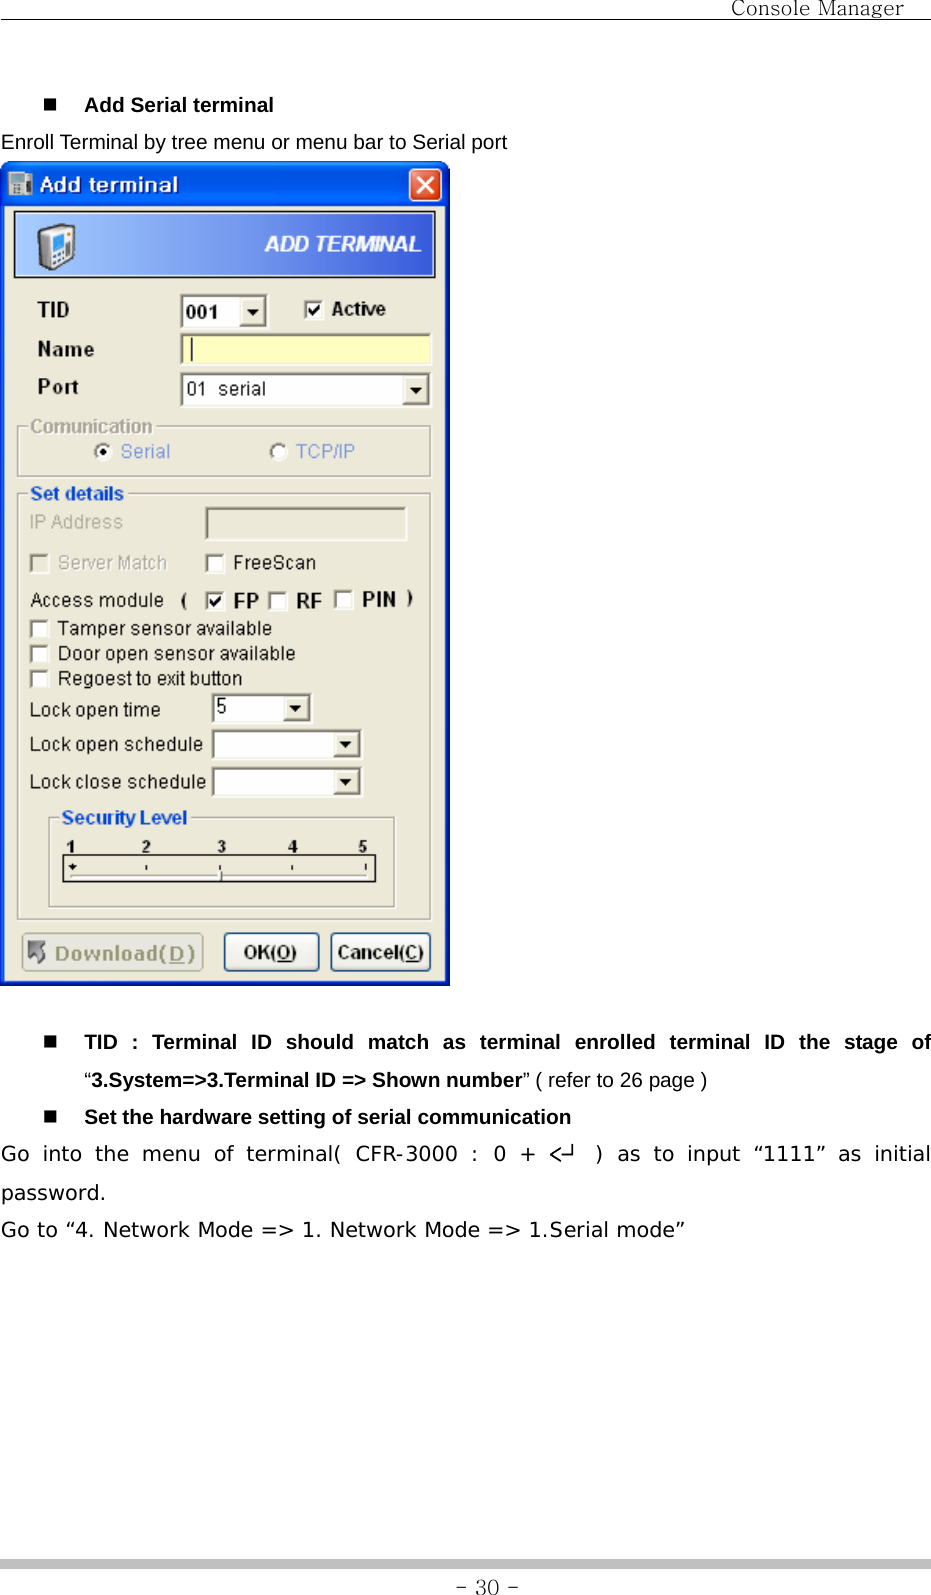                                Console Manager               - 30 - Add Serial terminal Enroll Terminal by tree menu or menu bar to Serial port      TID : Terminal ID should match as terminal enrolled terminal ID the stage of “3.System=&gt;3.Terminal ID =&gt; Shown number” ( refer to 26 page )  Set the hardware setting of serial communication Go into the menu of terminal( CFR-3000 : 0 + &lt;┘  ) as to input “1111” as initial password.  Go to “4. Network Mode =&gt; 1. Network Mode =&gt; 1.Serial mode” 